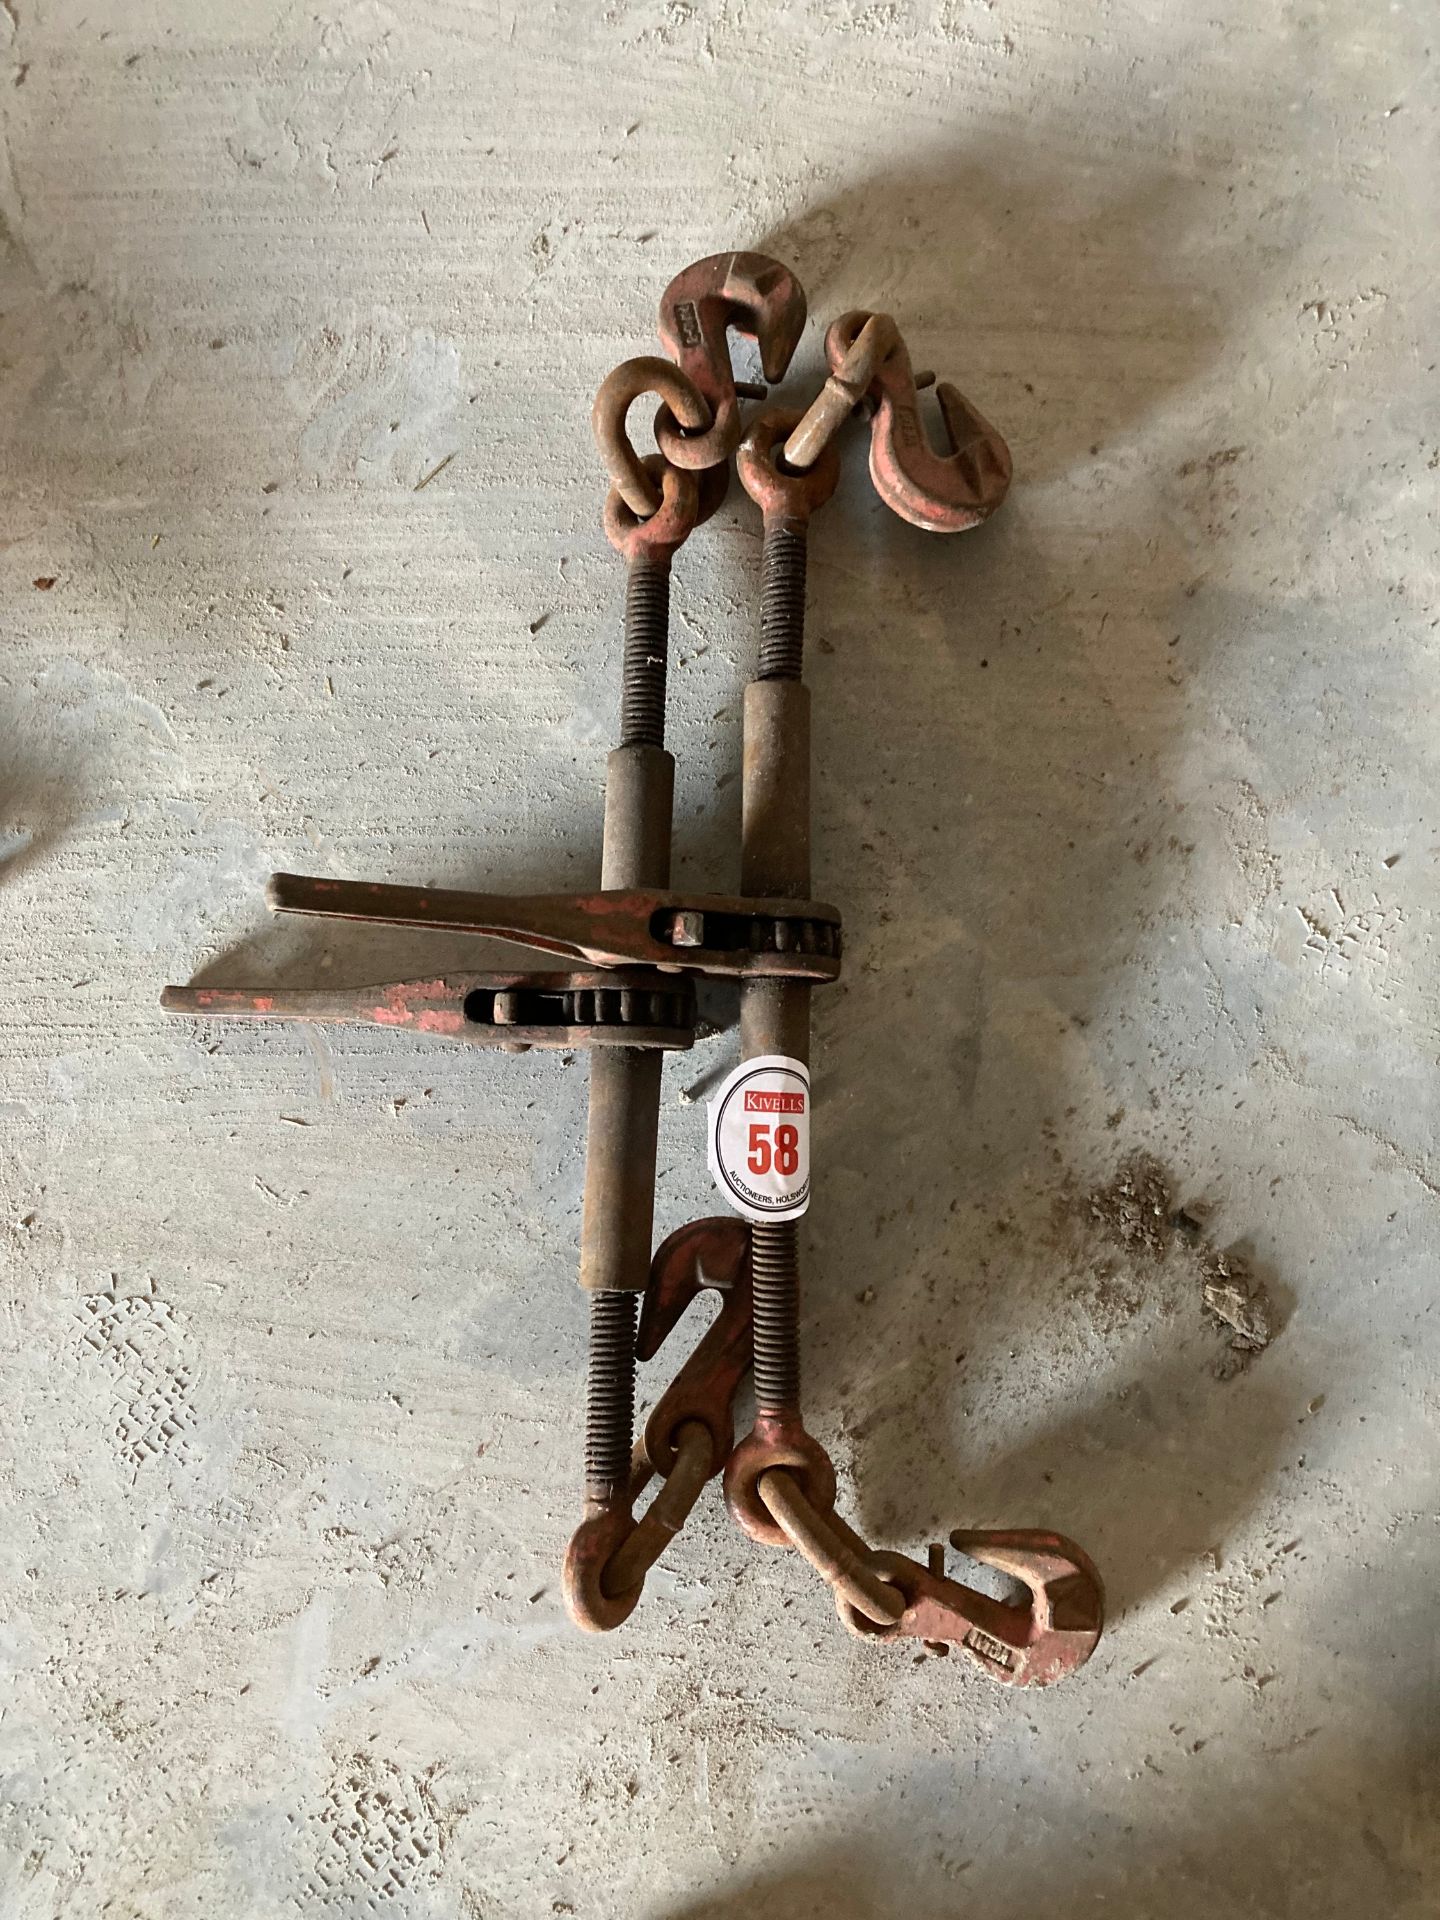 PAIR OF RATCHET CHAIN TENSIONERS - Image 2 of 2